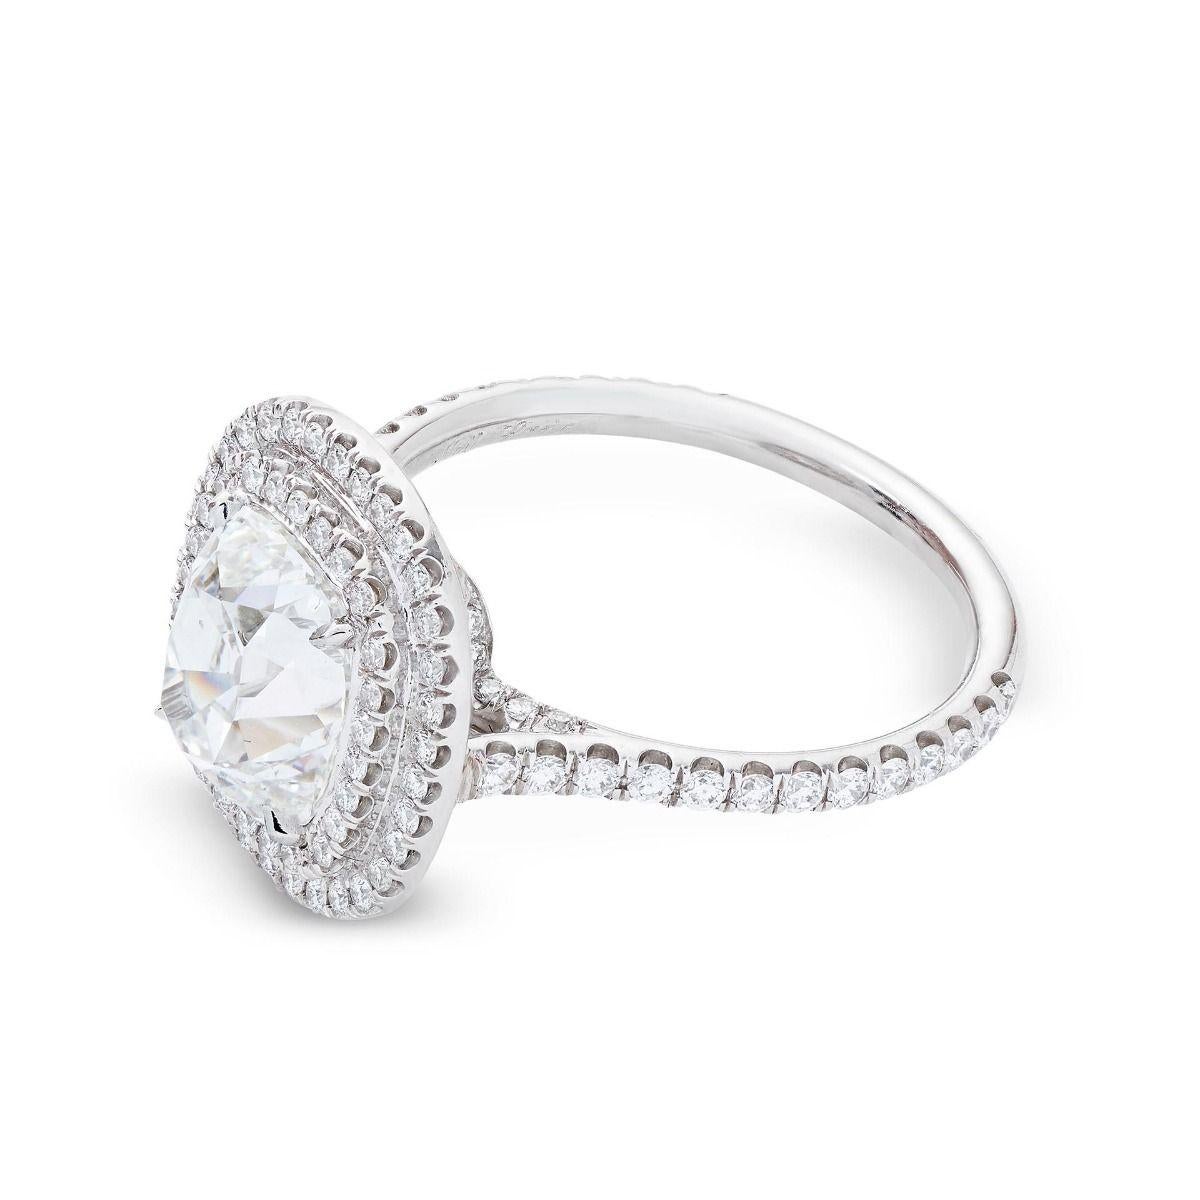 Set in platinum, this timeless handmade ring features a lavish, vintage-style cushion-cut diamond with high crown angles, weighing 2.48 cts. An accenting 102 diamonds, weighing 0.65 ct, follow a double halo and channel the diamond-studded